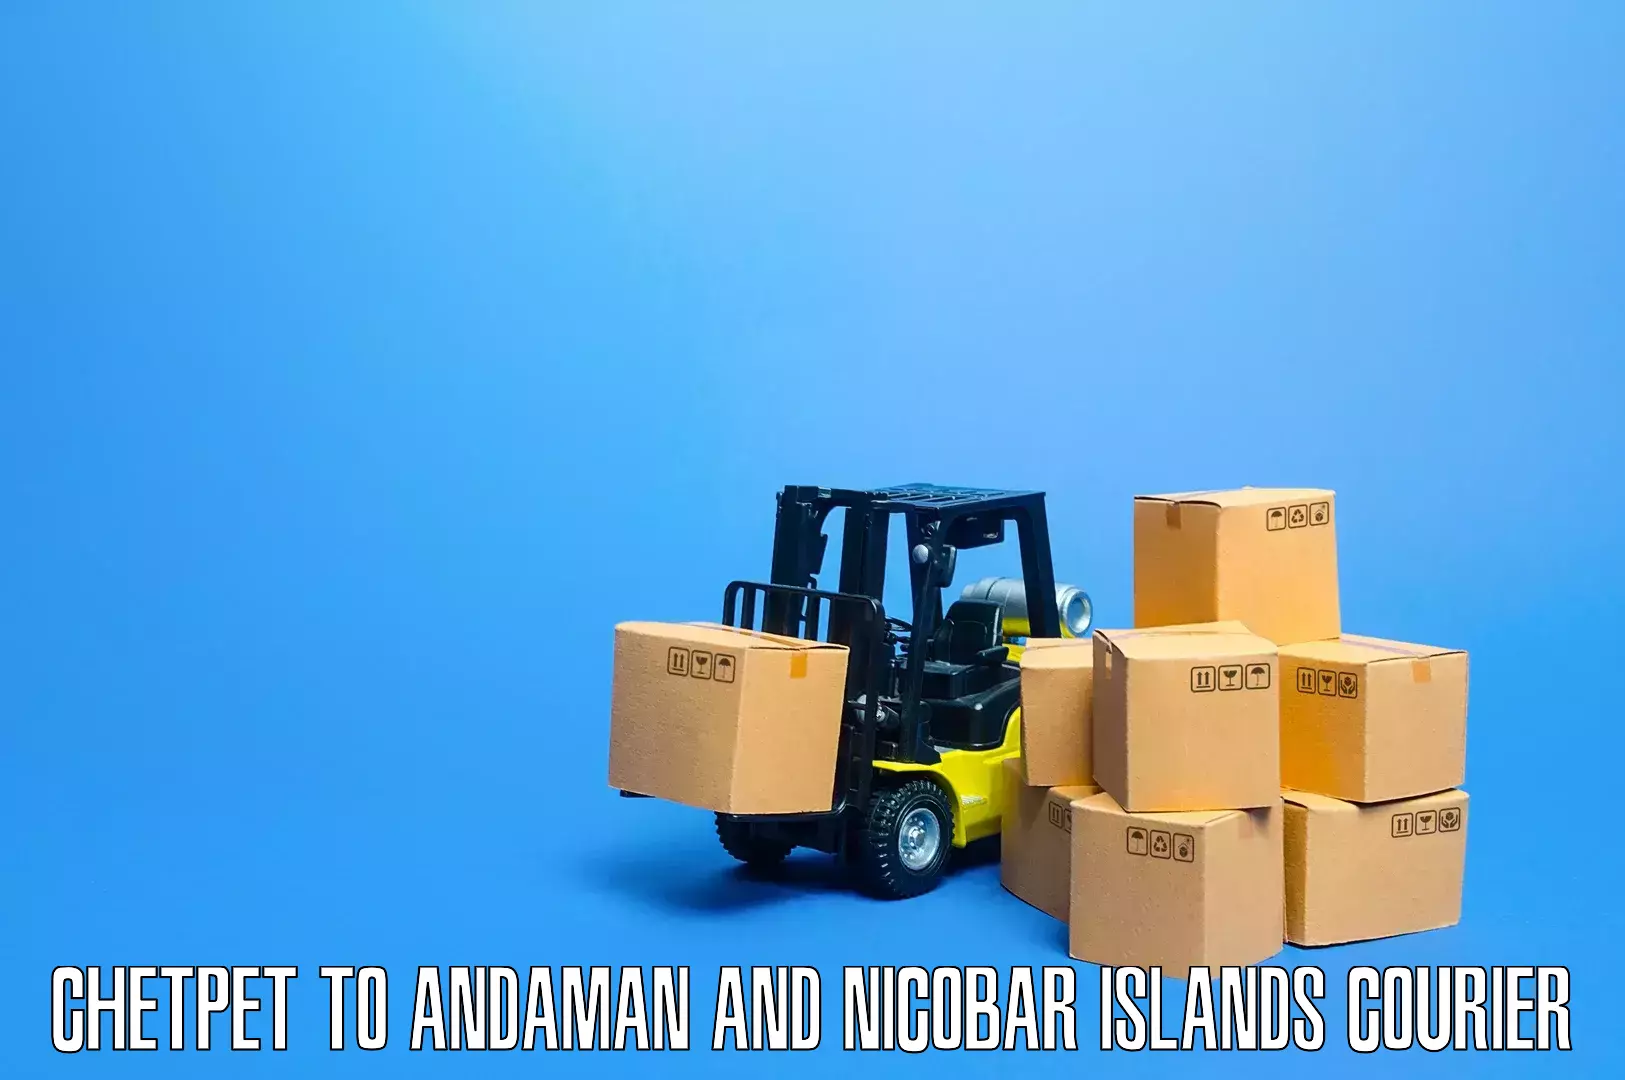 Quality moving services in Chetpet to Andaman and Nicobar Islands